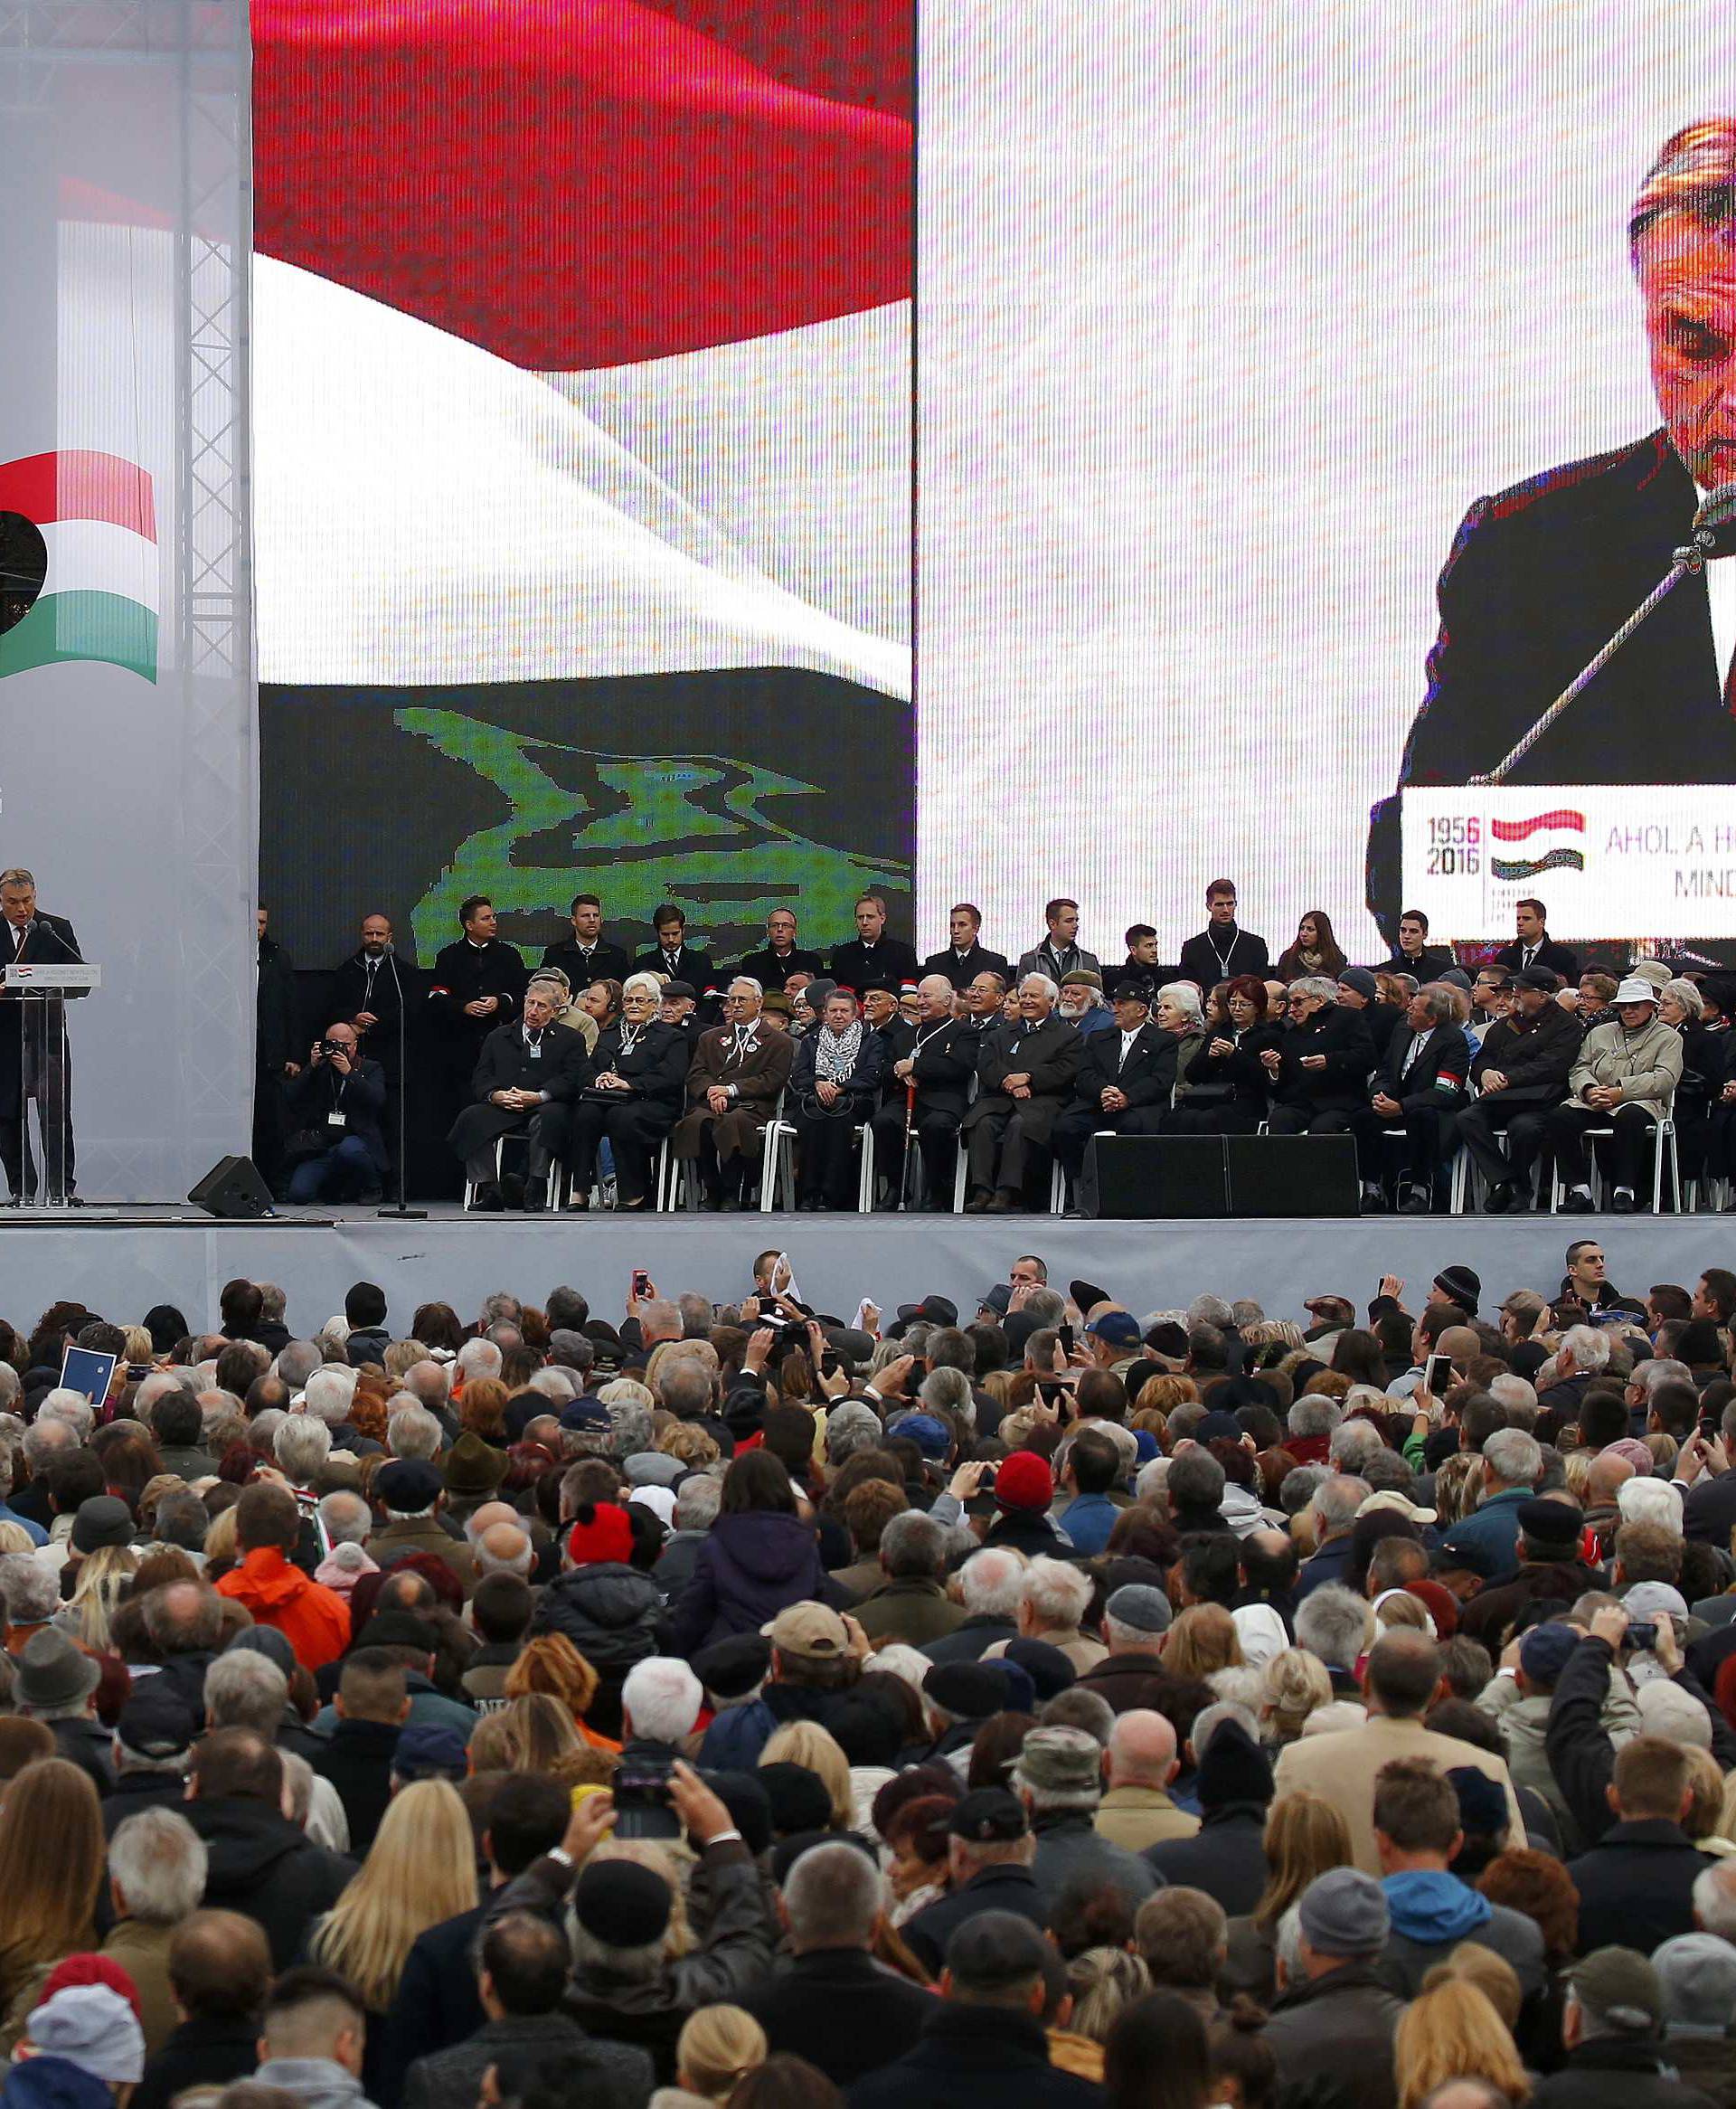 Hungarian Prime Minister Orban speaks during a ceremony marking the 60th anniversary of 1956 anti-Communist uprising in Budapest